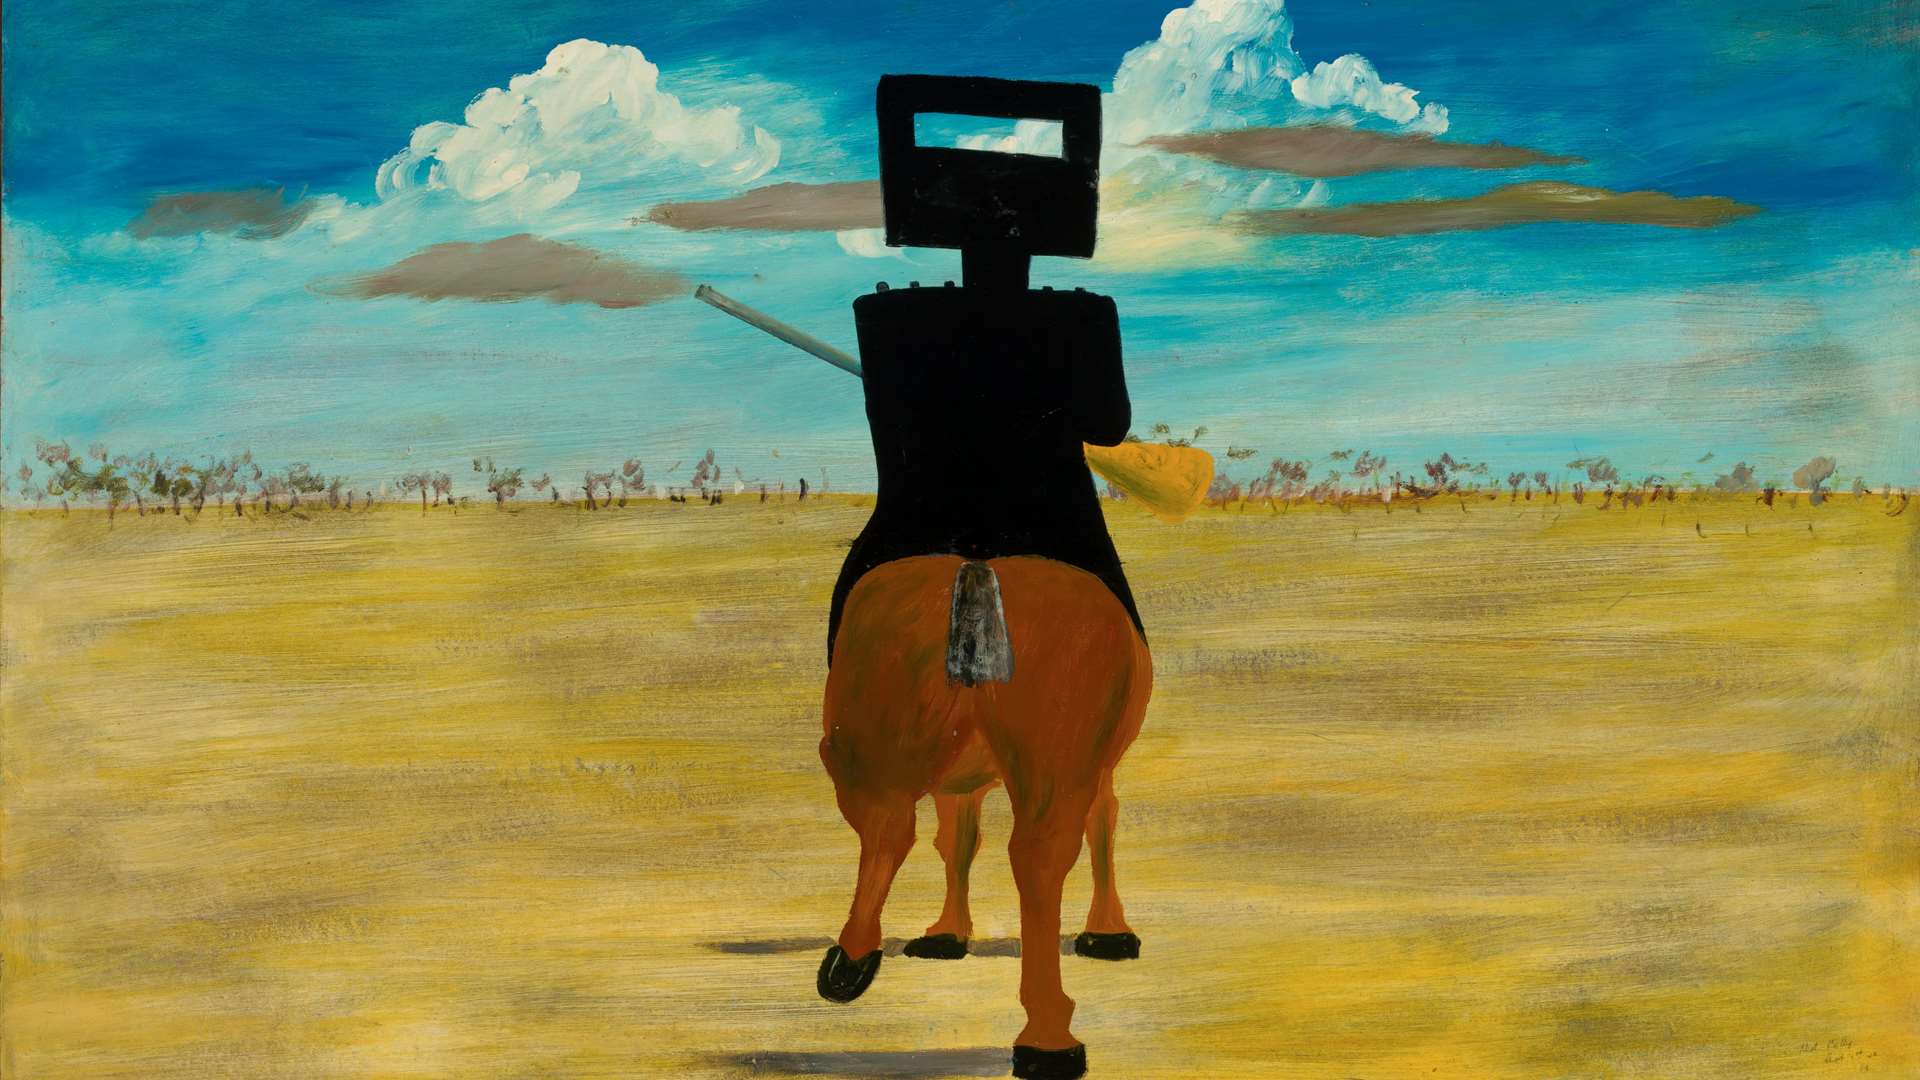 Sidney Nolan's Ned Kelly, 1946. Enamel on composition board. Copyright: Royal Academy of Arts